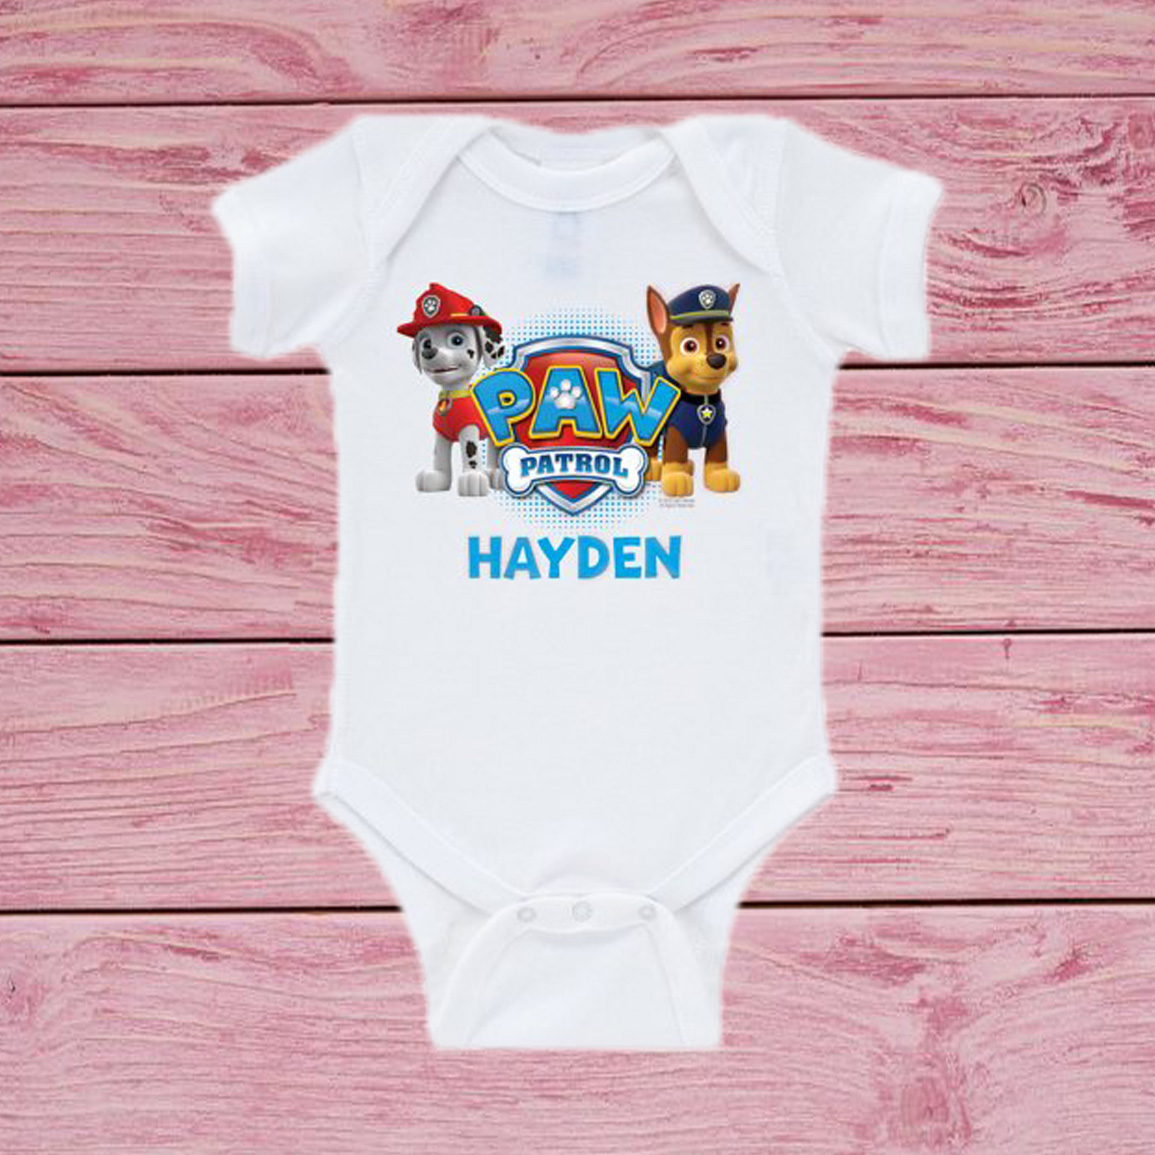 Personalized Paw Pantrol Baby Onesie - Custom Baby Onesie - Cute Paw trol Baby Suit - New Born Gift - Baby Shower Gift - Gift for Baby - Funny Animal